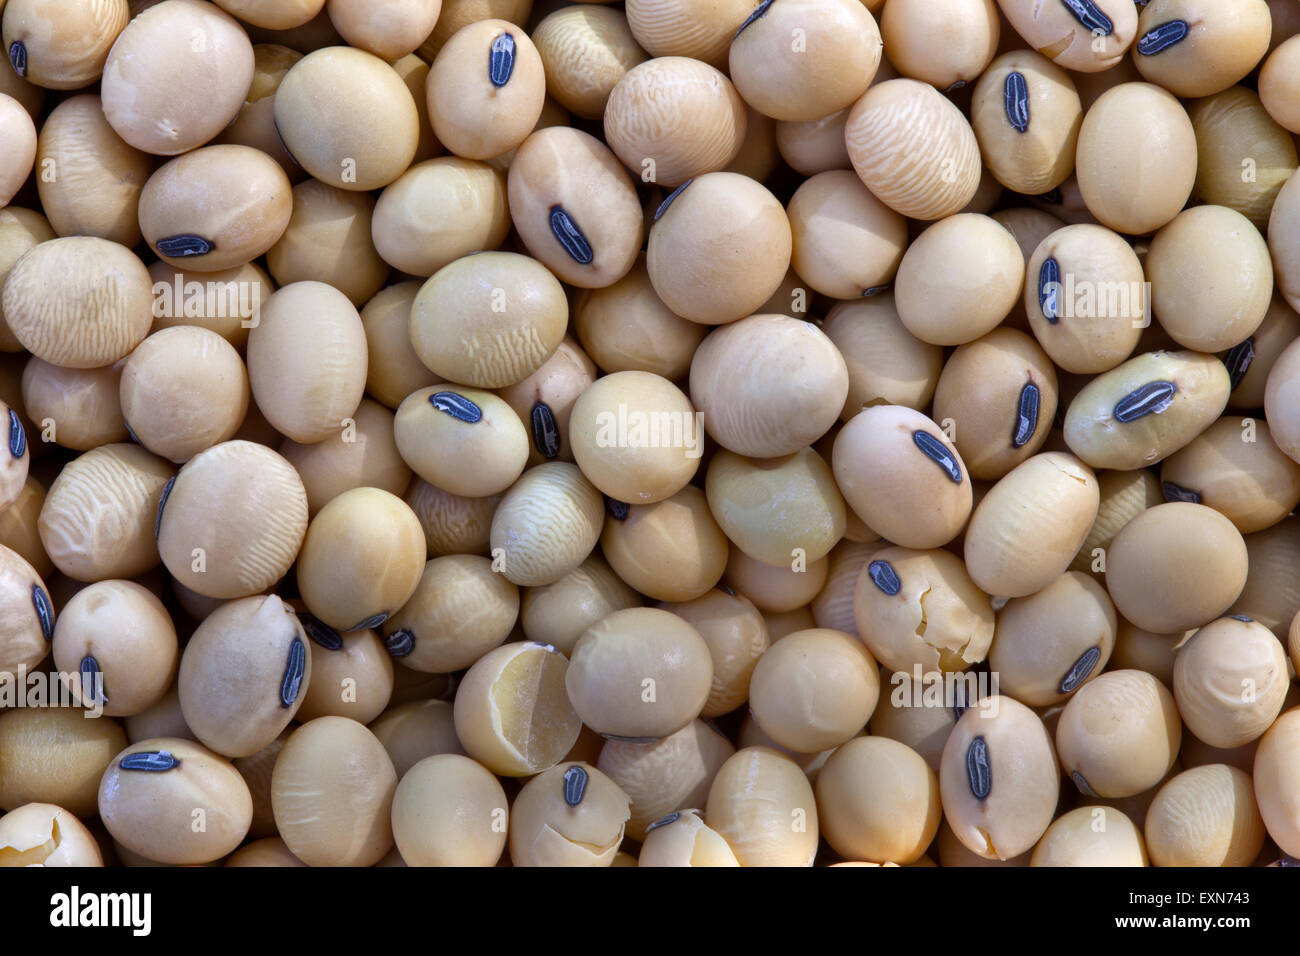 Close-up of harvested soybeans 'Glycine max'. Stock Photo